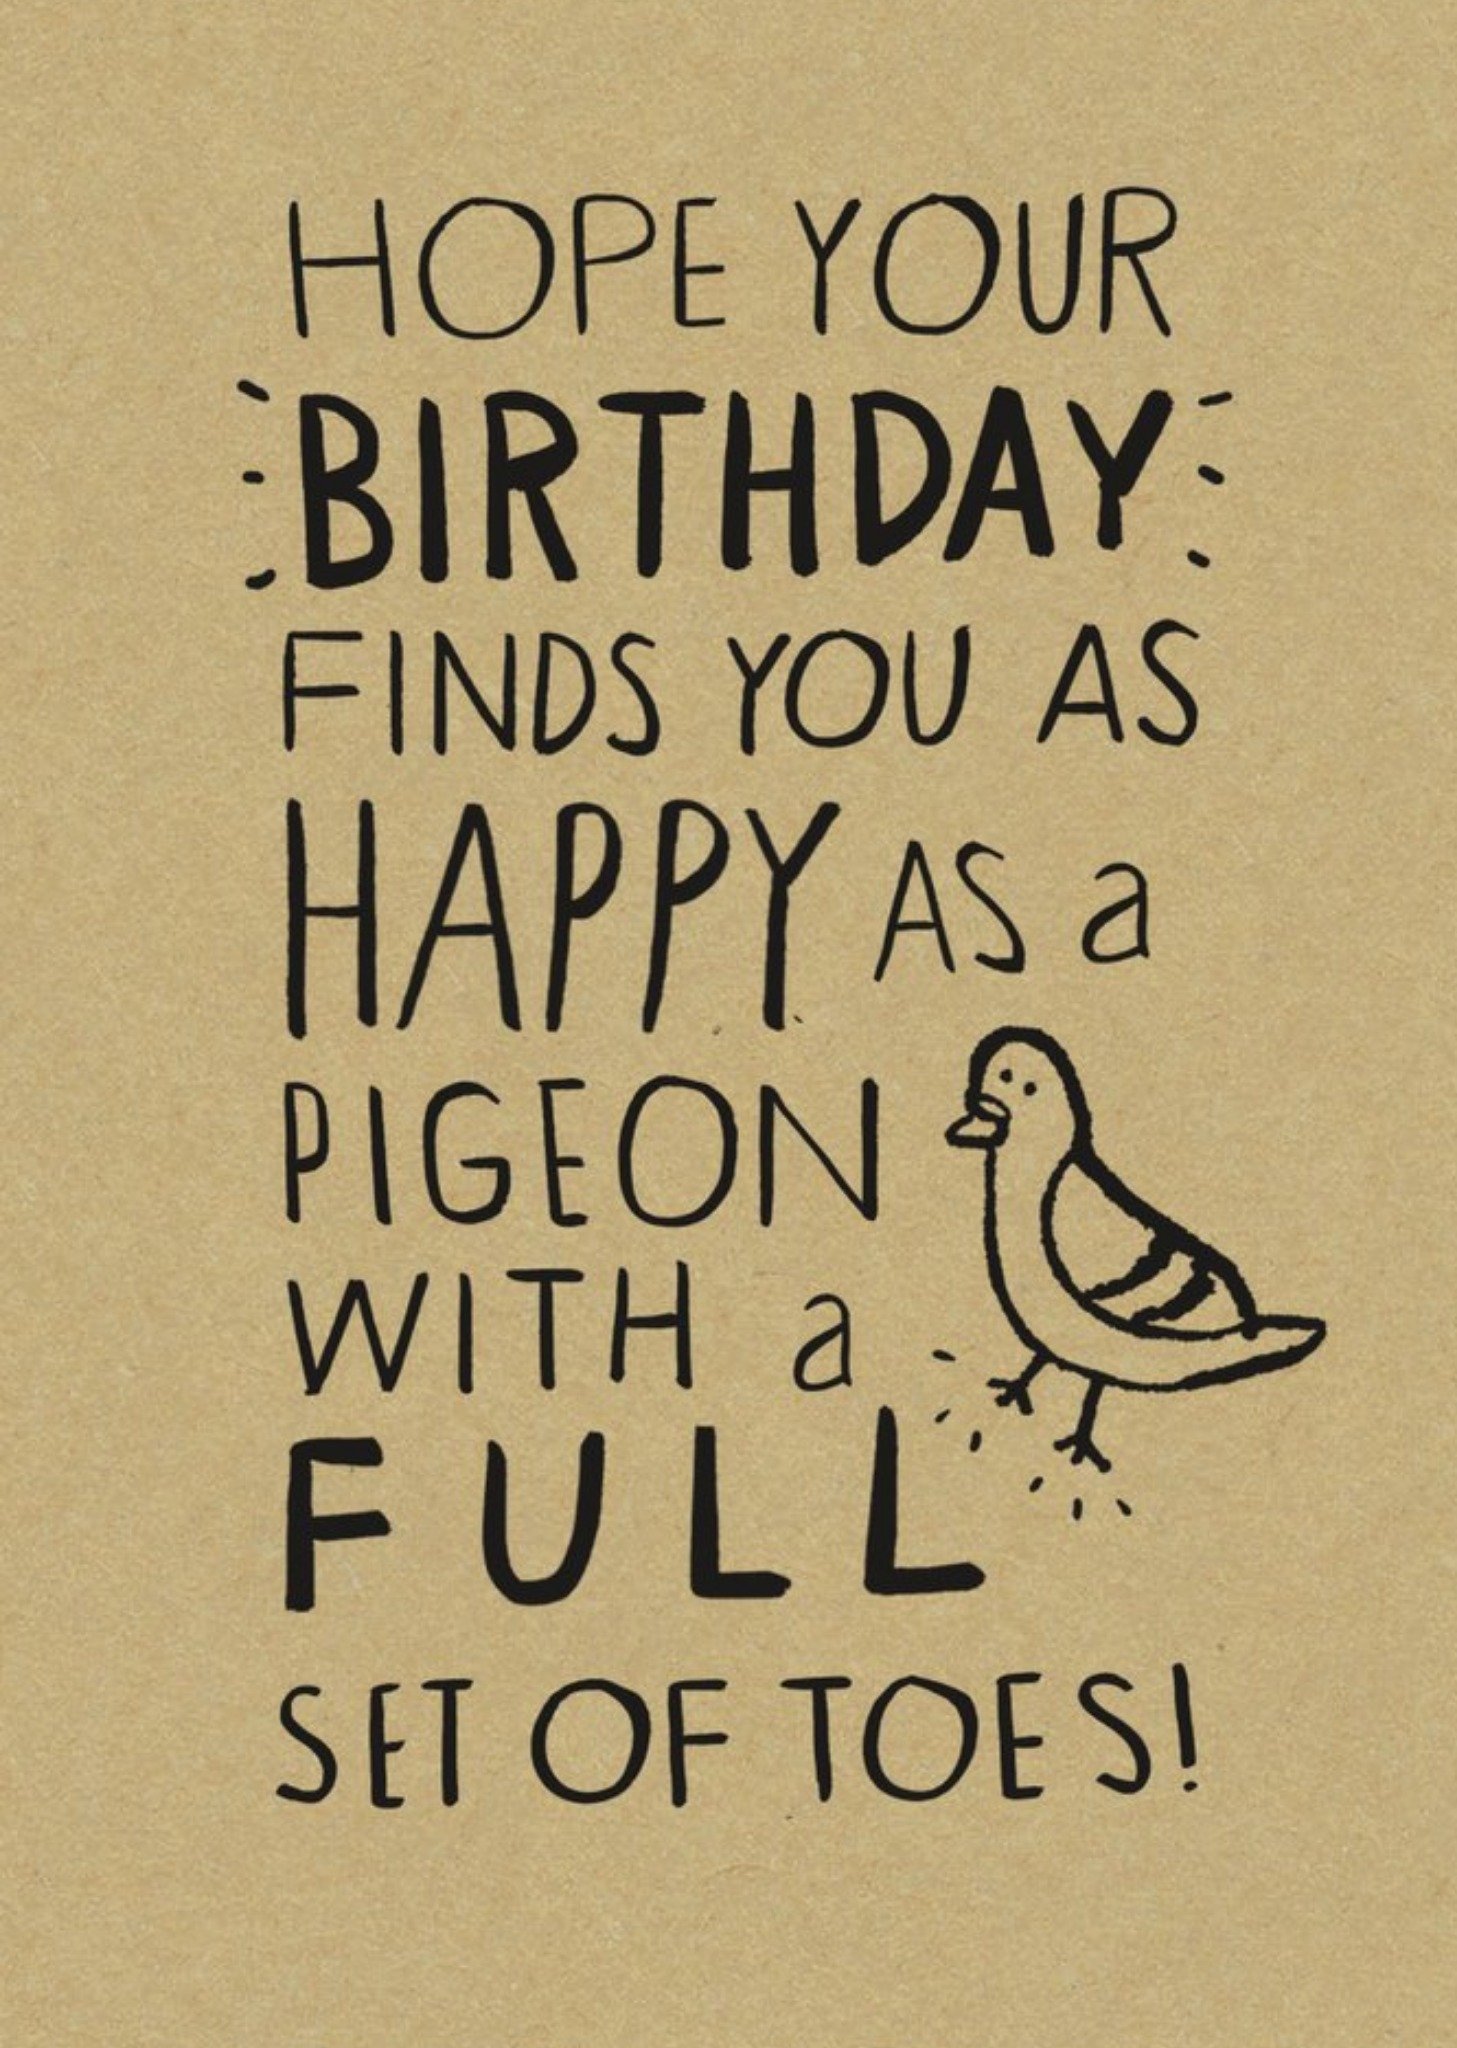 Moonpig Ukg Hope Your Birthday Finds You As Happy As A Pigeon With A Full Set Of Toes Card, Large